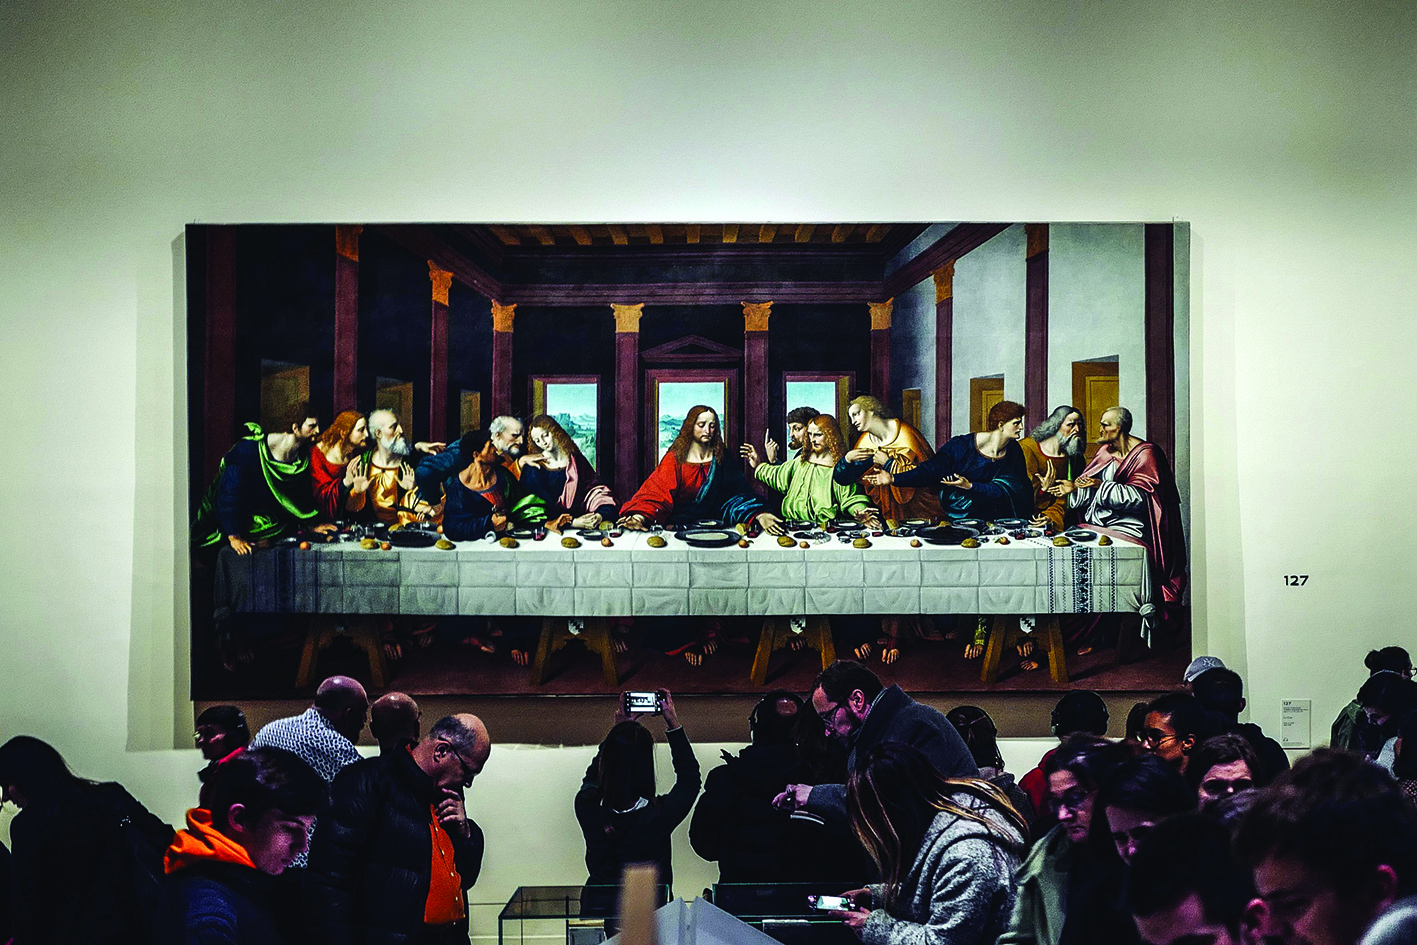 Visitors look at a version of 'The Last Supper' during the night and free opening of the 'Leonardo da Vinci' exhibition at The Louvre Museum on February 21, 2020 in Paris. - The Louvre announced that for its final days of opening on Friday February 21, Saturday 22 and Sunday 23, the exhibition would be open all night as well as for its regular daytime hours. (Photo by LUCAS BARIOULET / AFP)